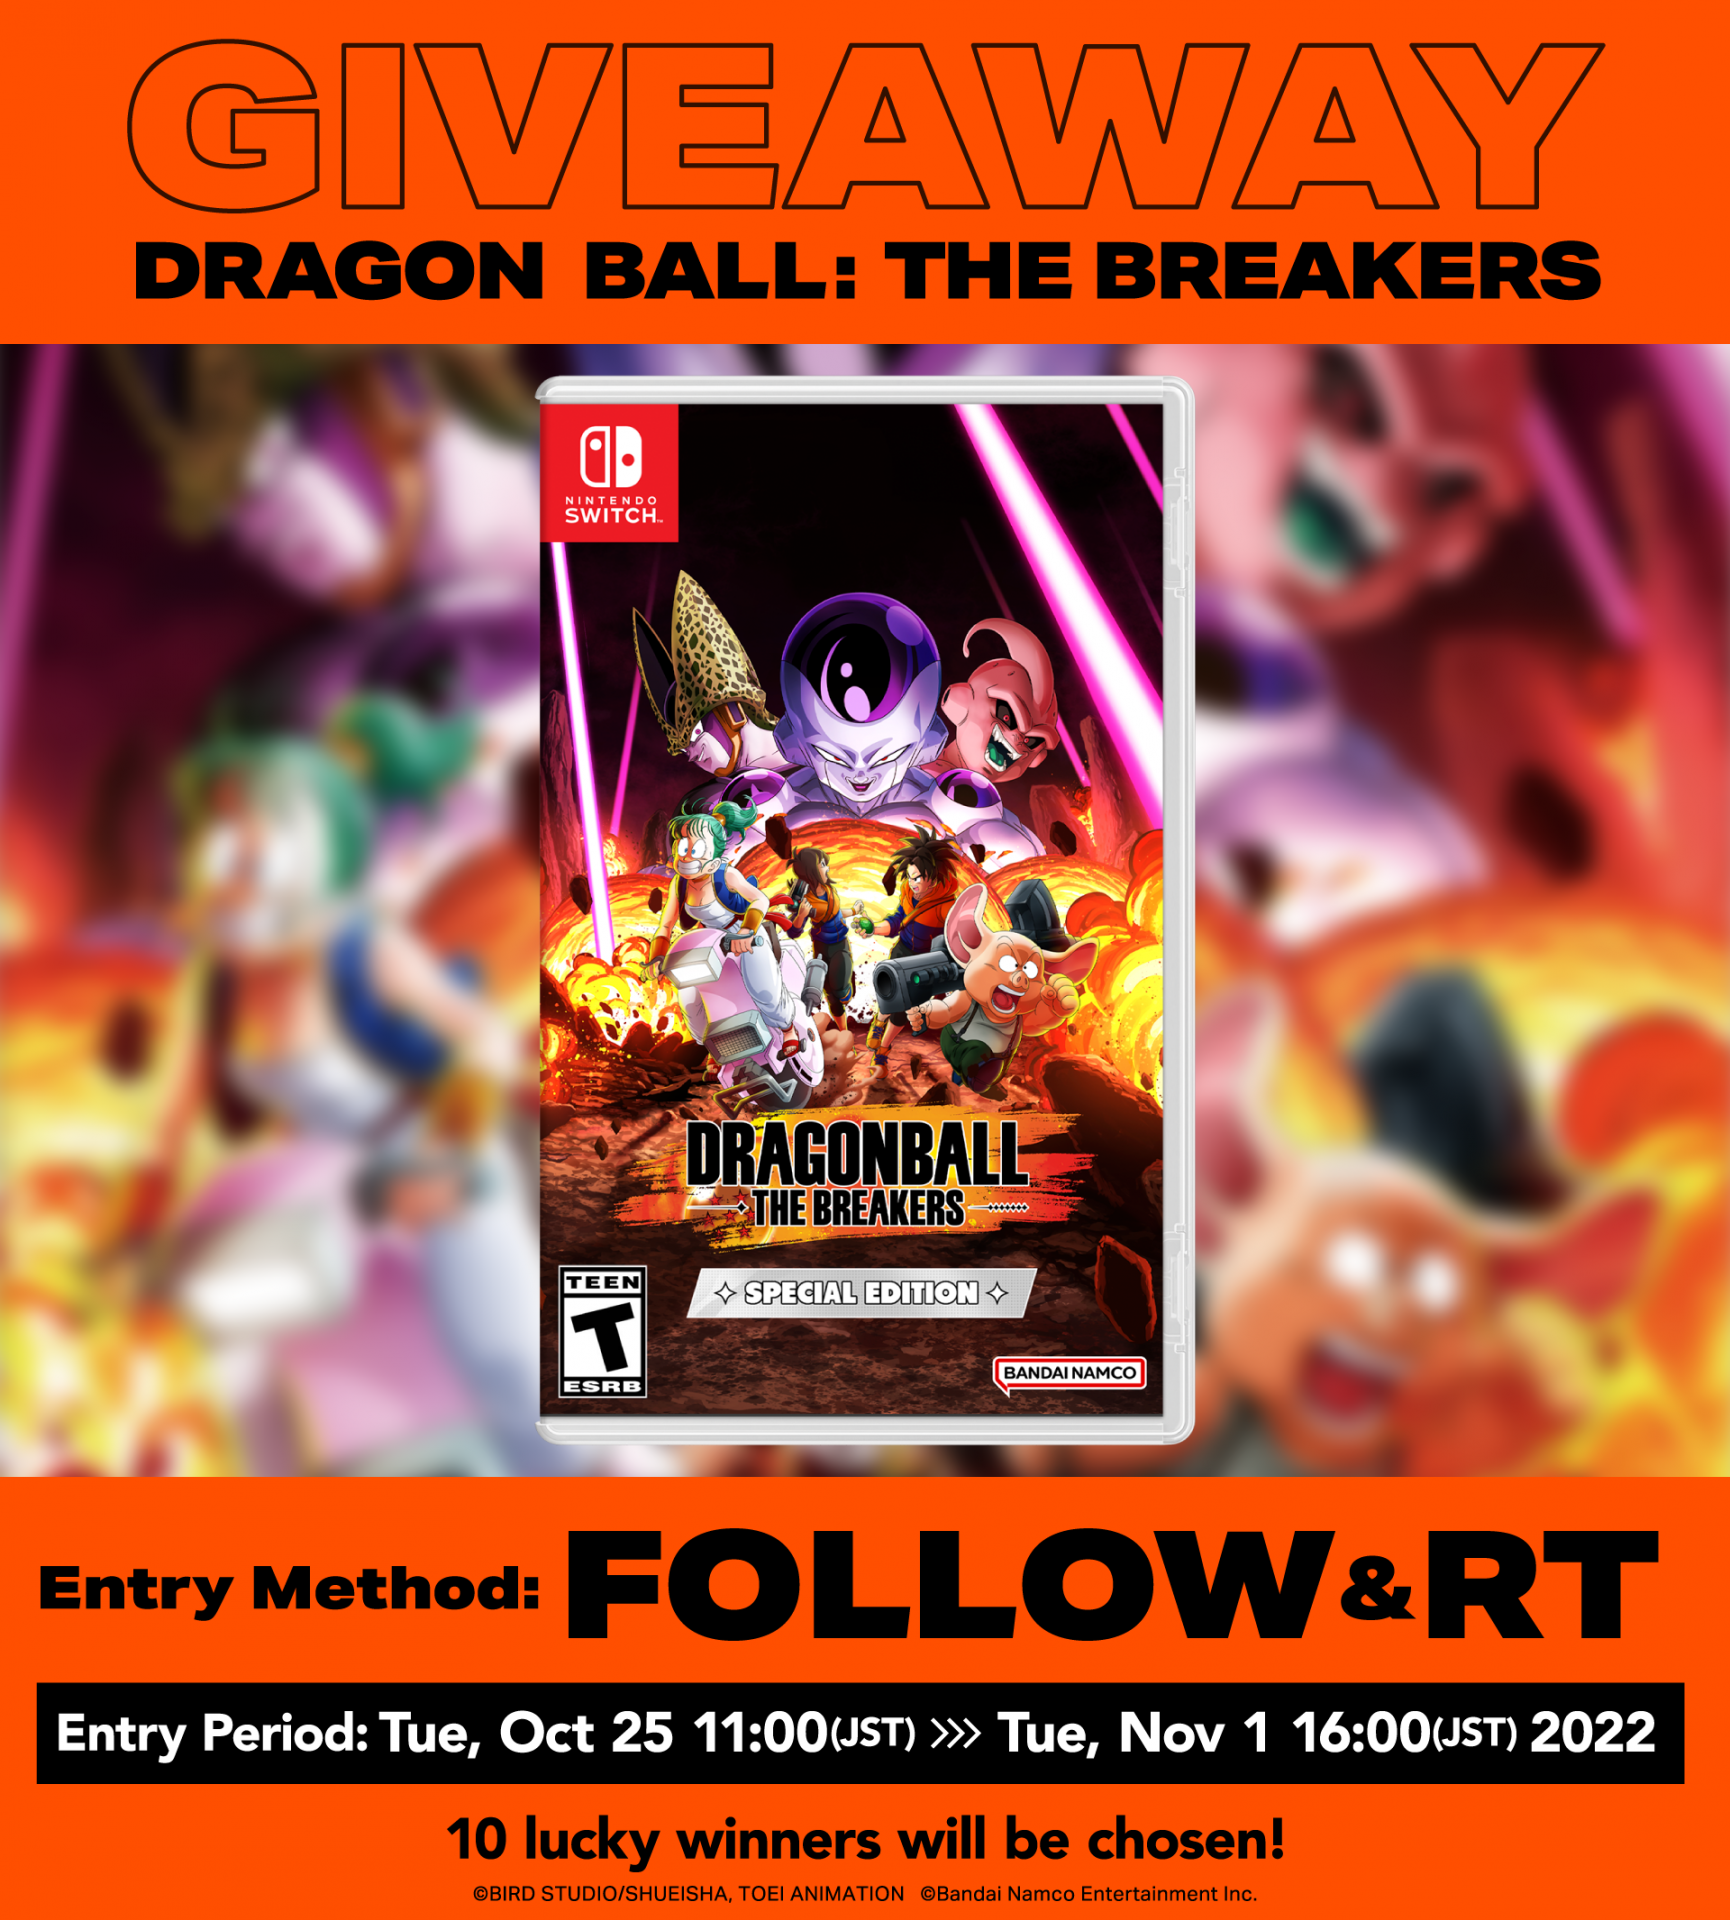 DRAGON BALL:THE BREAKERS Official Website